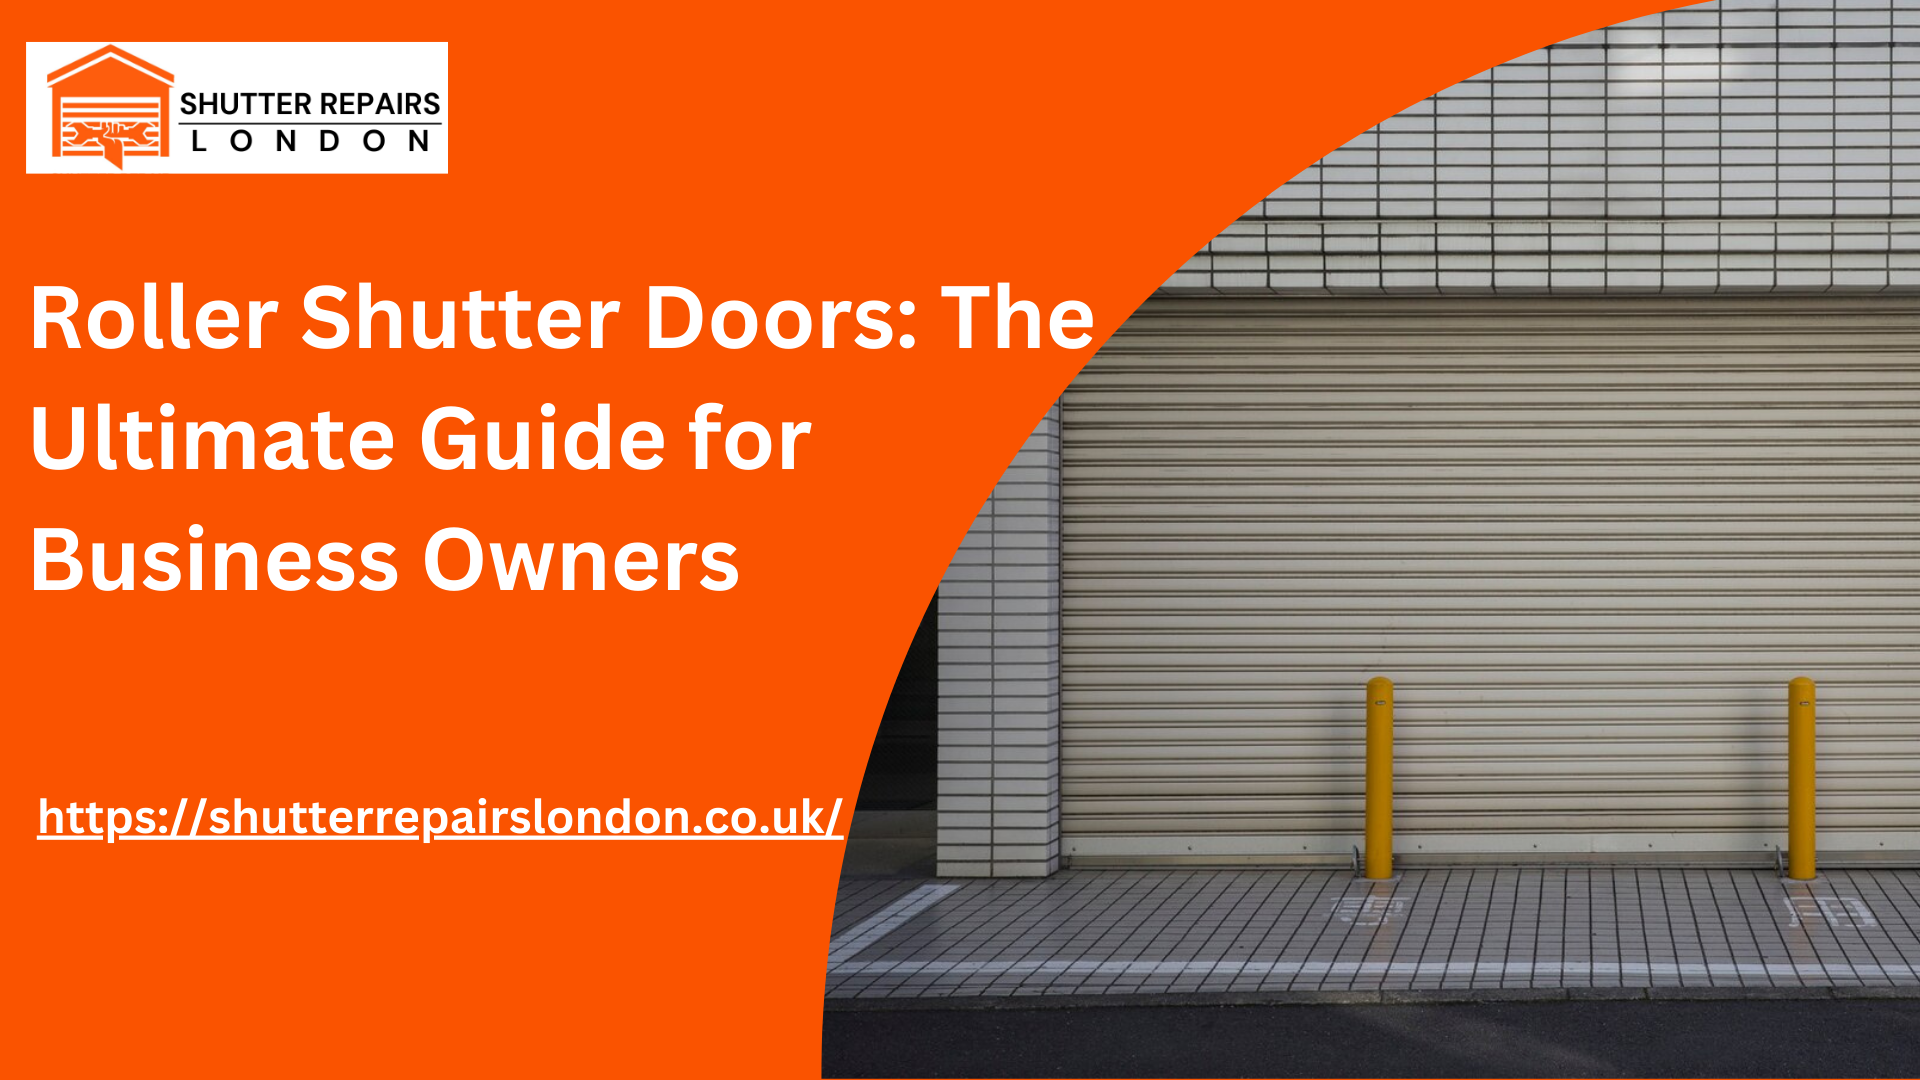 Roller Shutter Doors: The Ultimate Guide for Business Owners